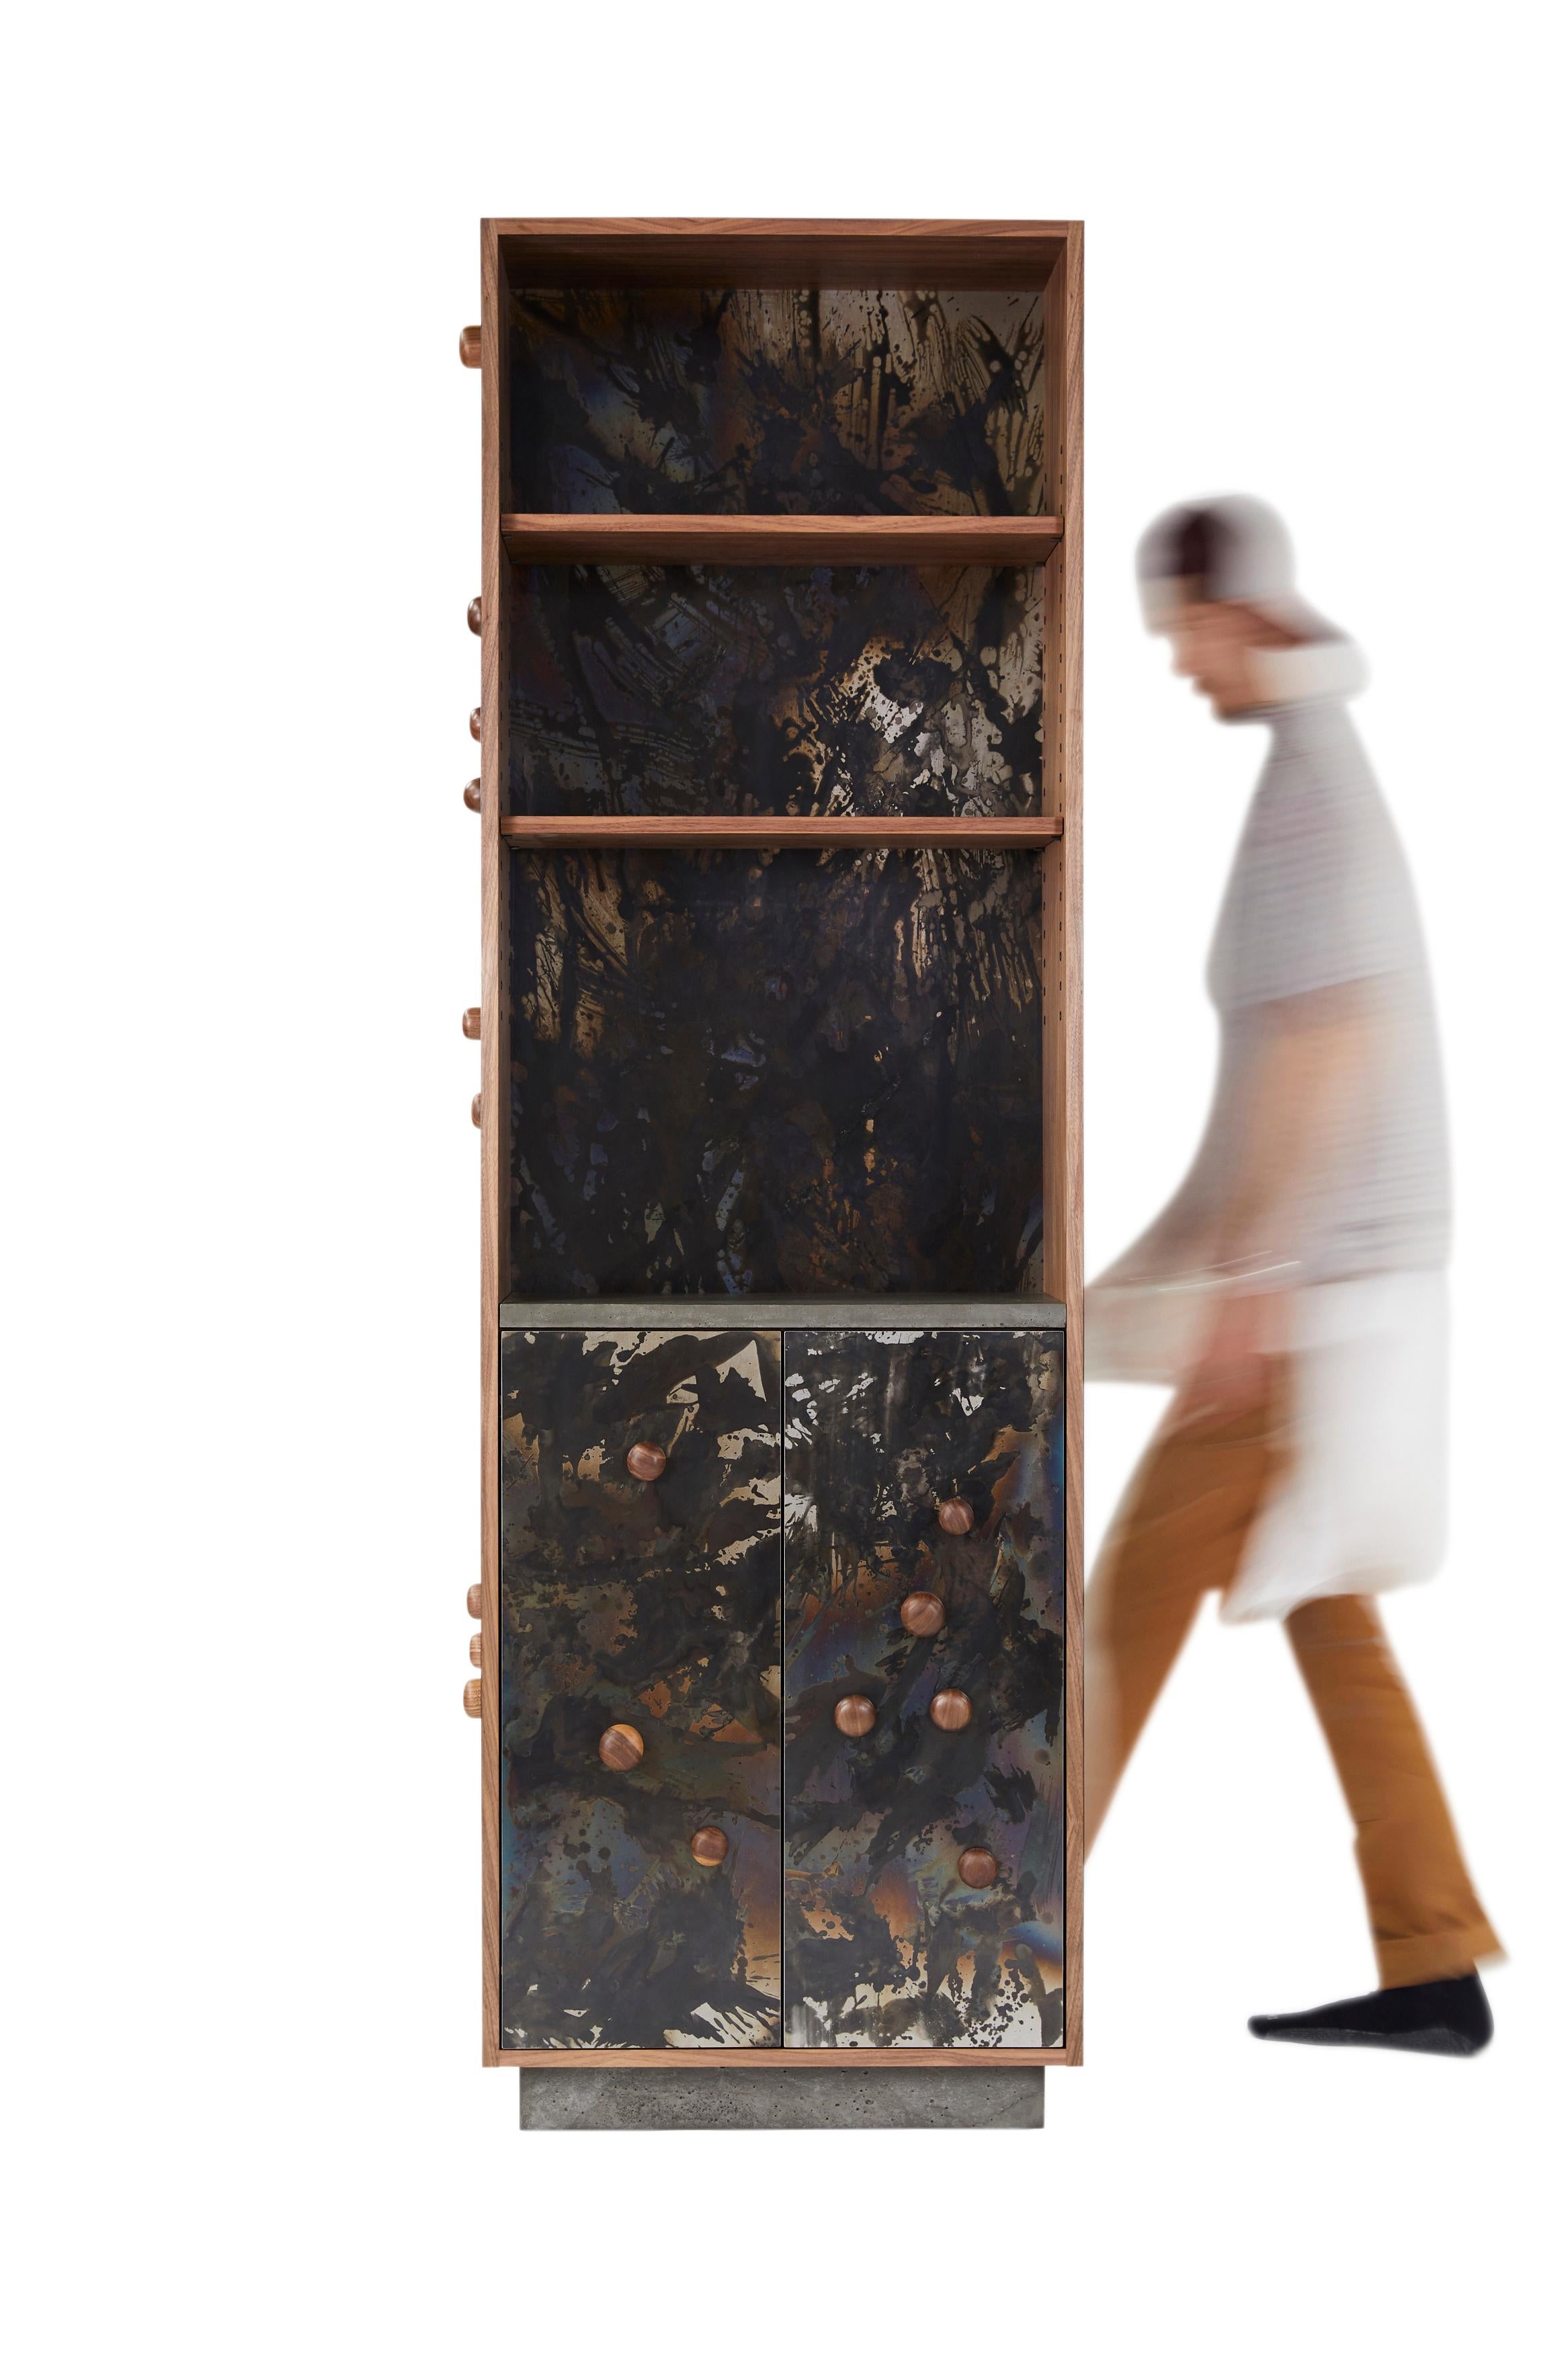 This piece features adjustable shelving with 